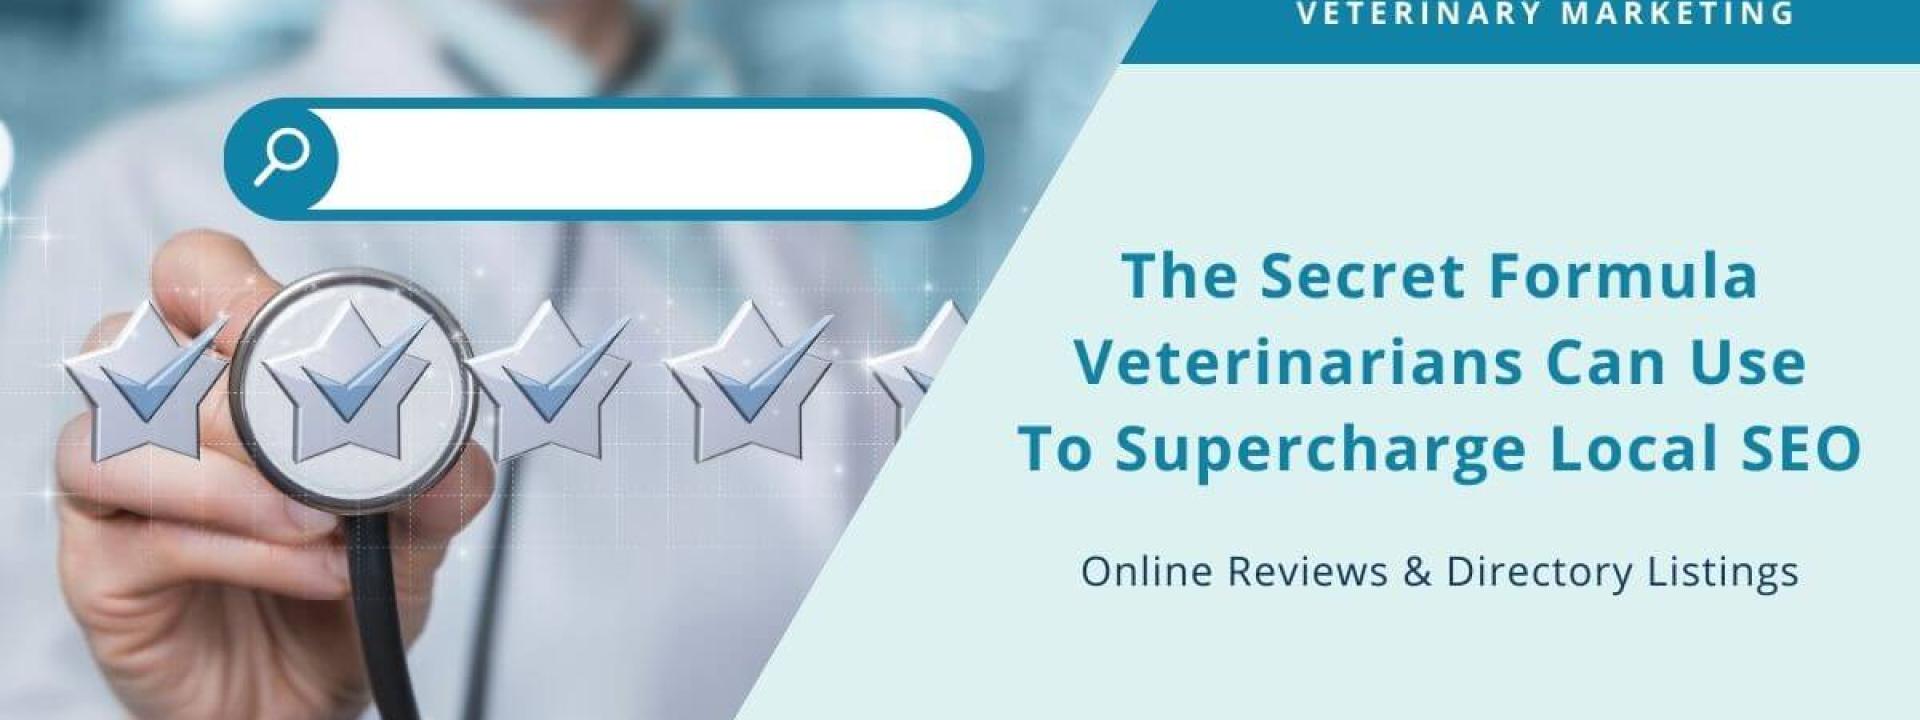 Online Reviews & Directory Listings: The Secret Formula Veterinarians Can Use To Supercharge Local SEO